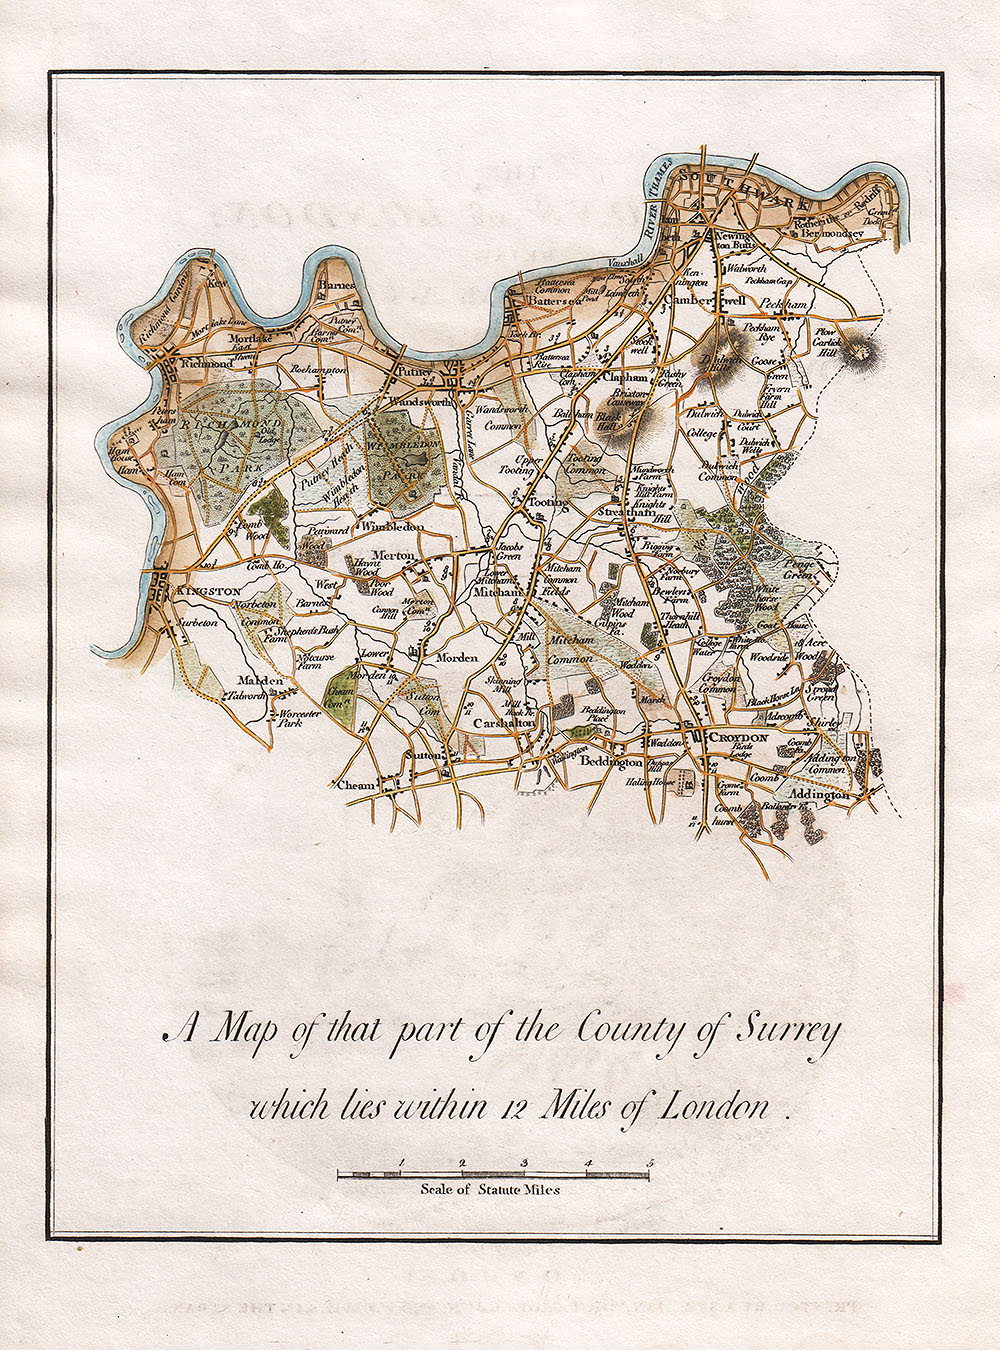 A Map of that part of the County of Surrey which lies withing 12 Miles of London